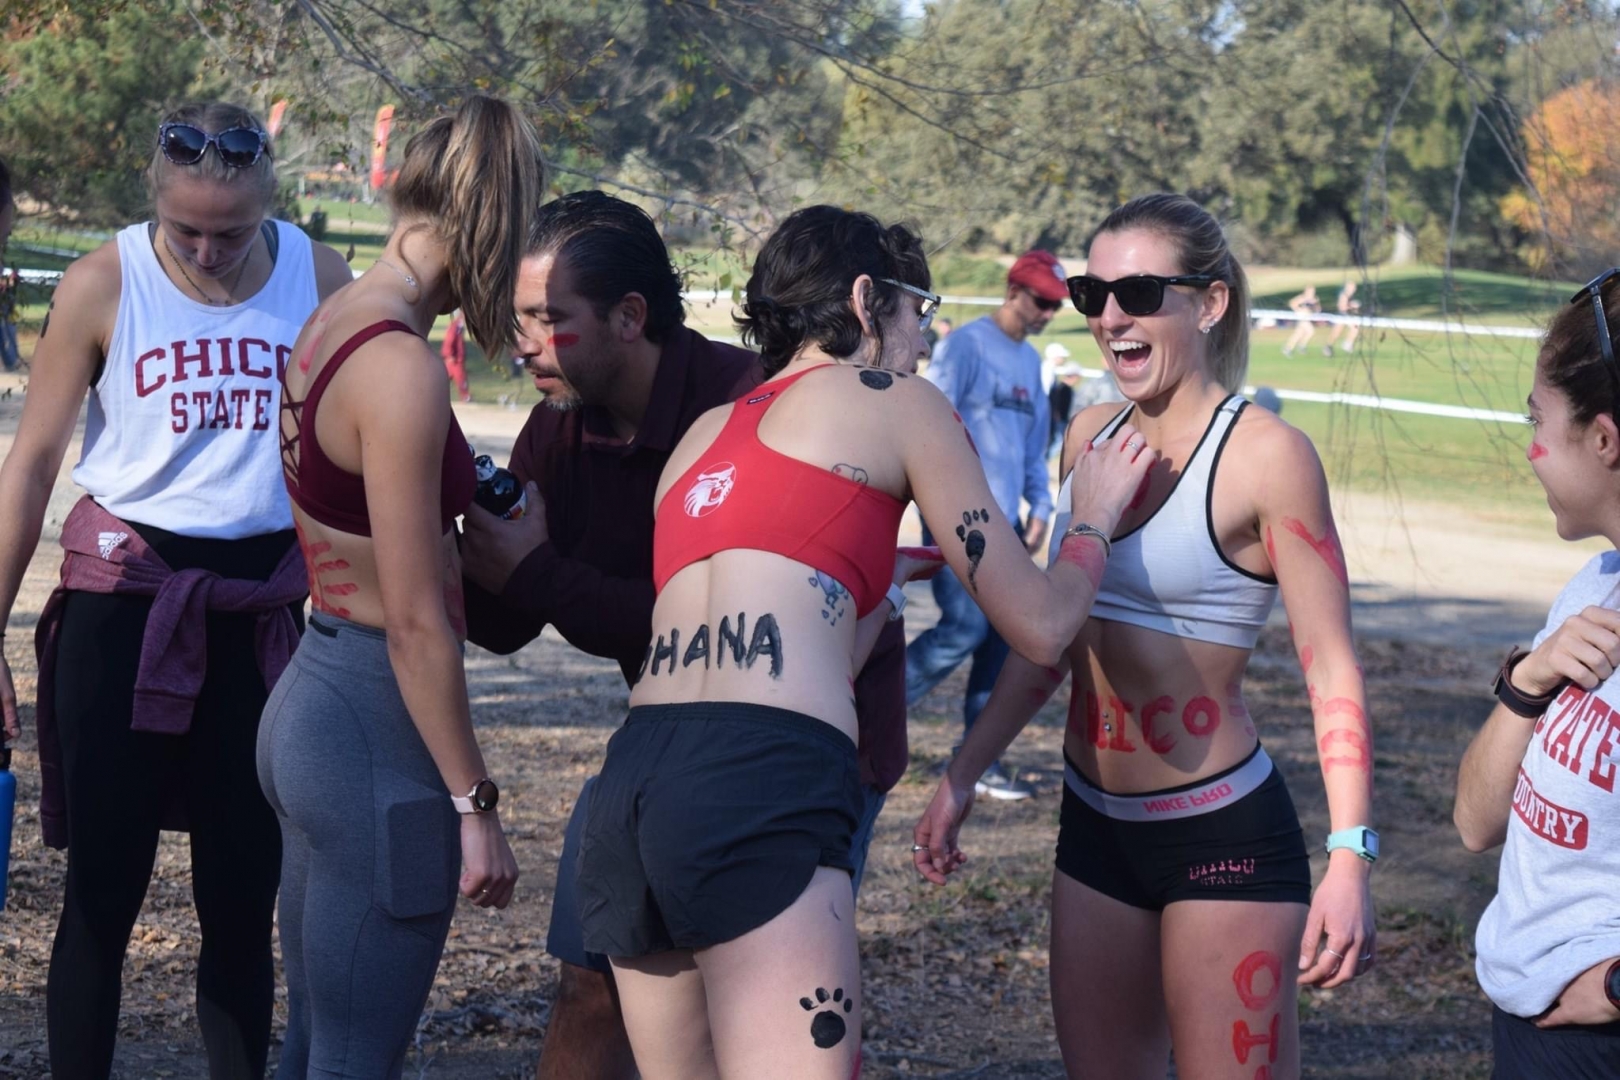 MacKenzie Deeter laughs as teammates cover her in body paint before a track meet.